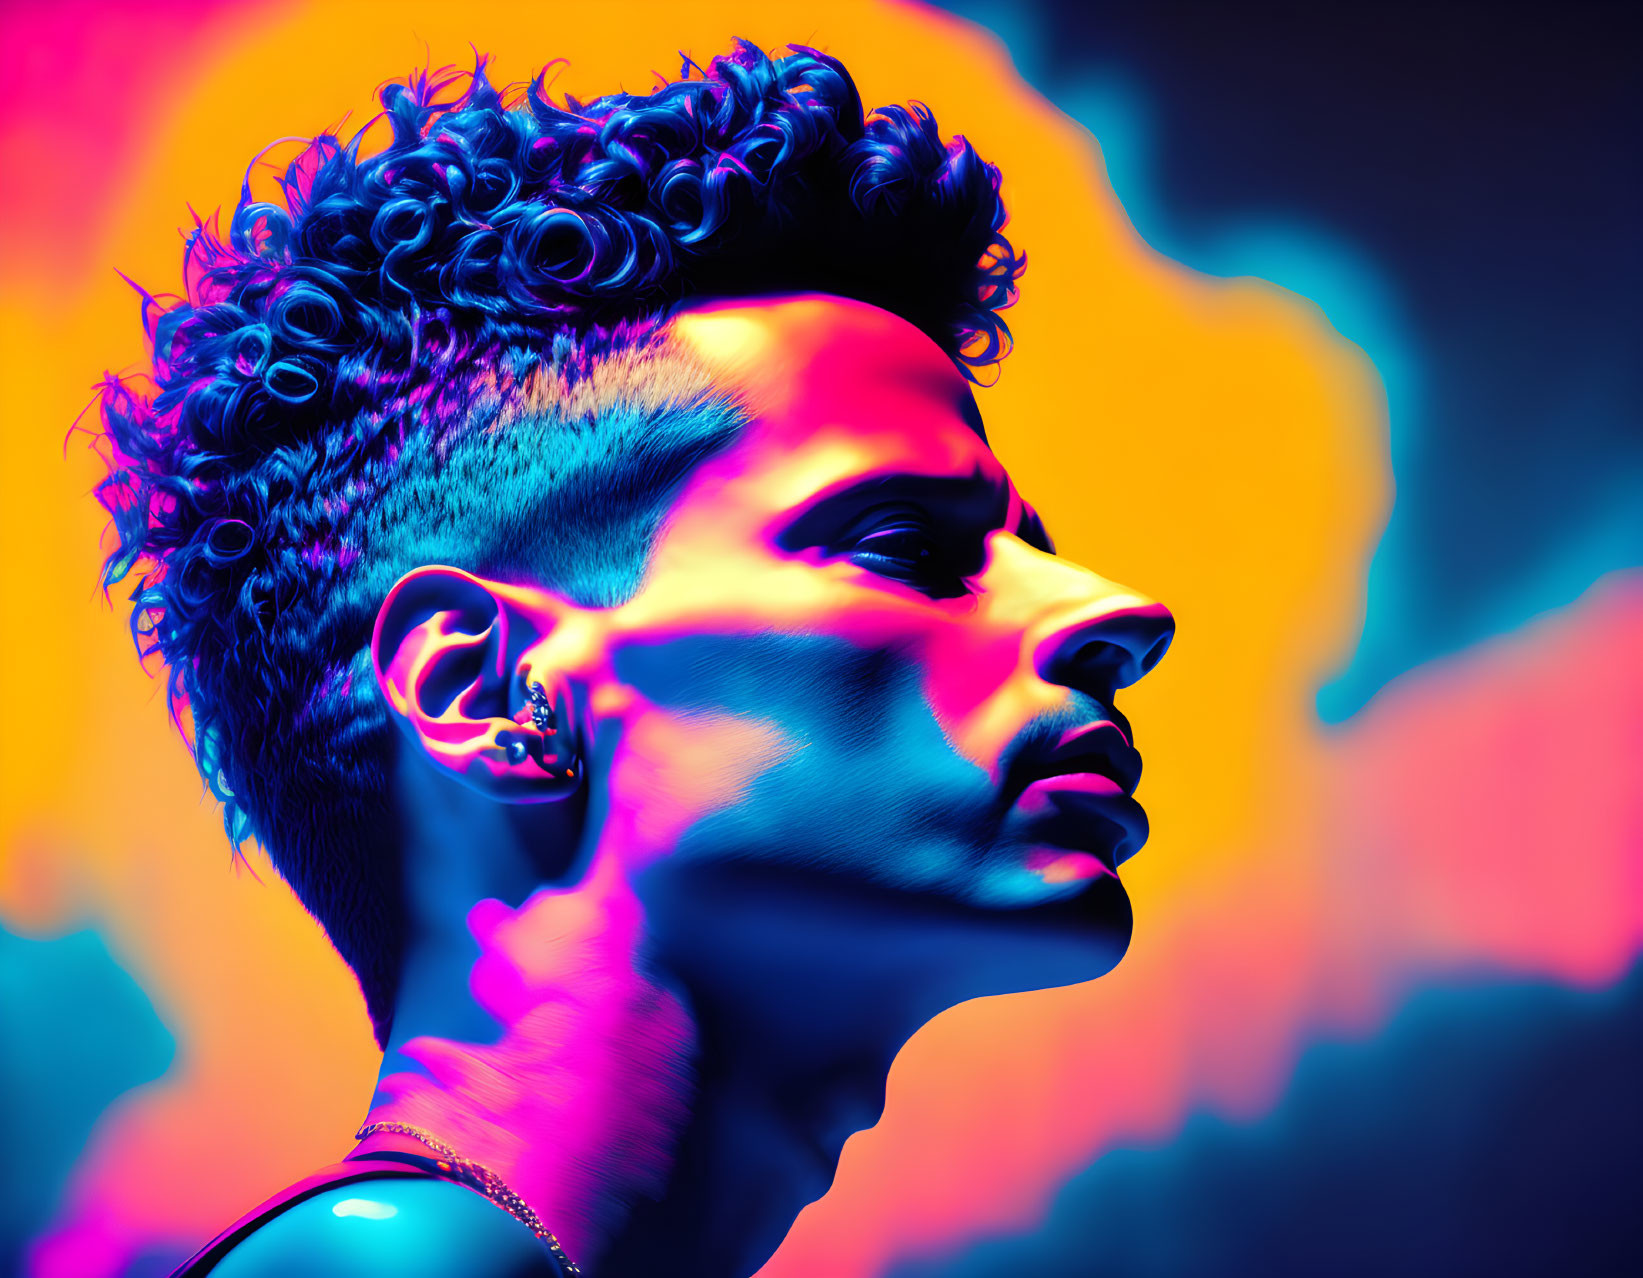 Curly Haired Person on Neon Background